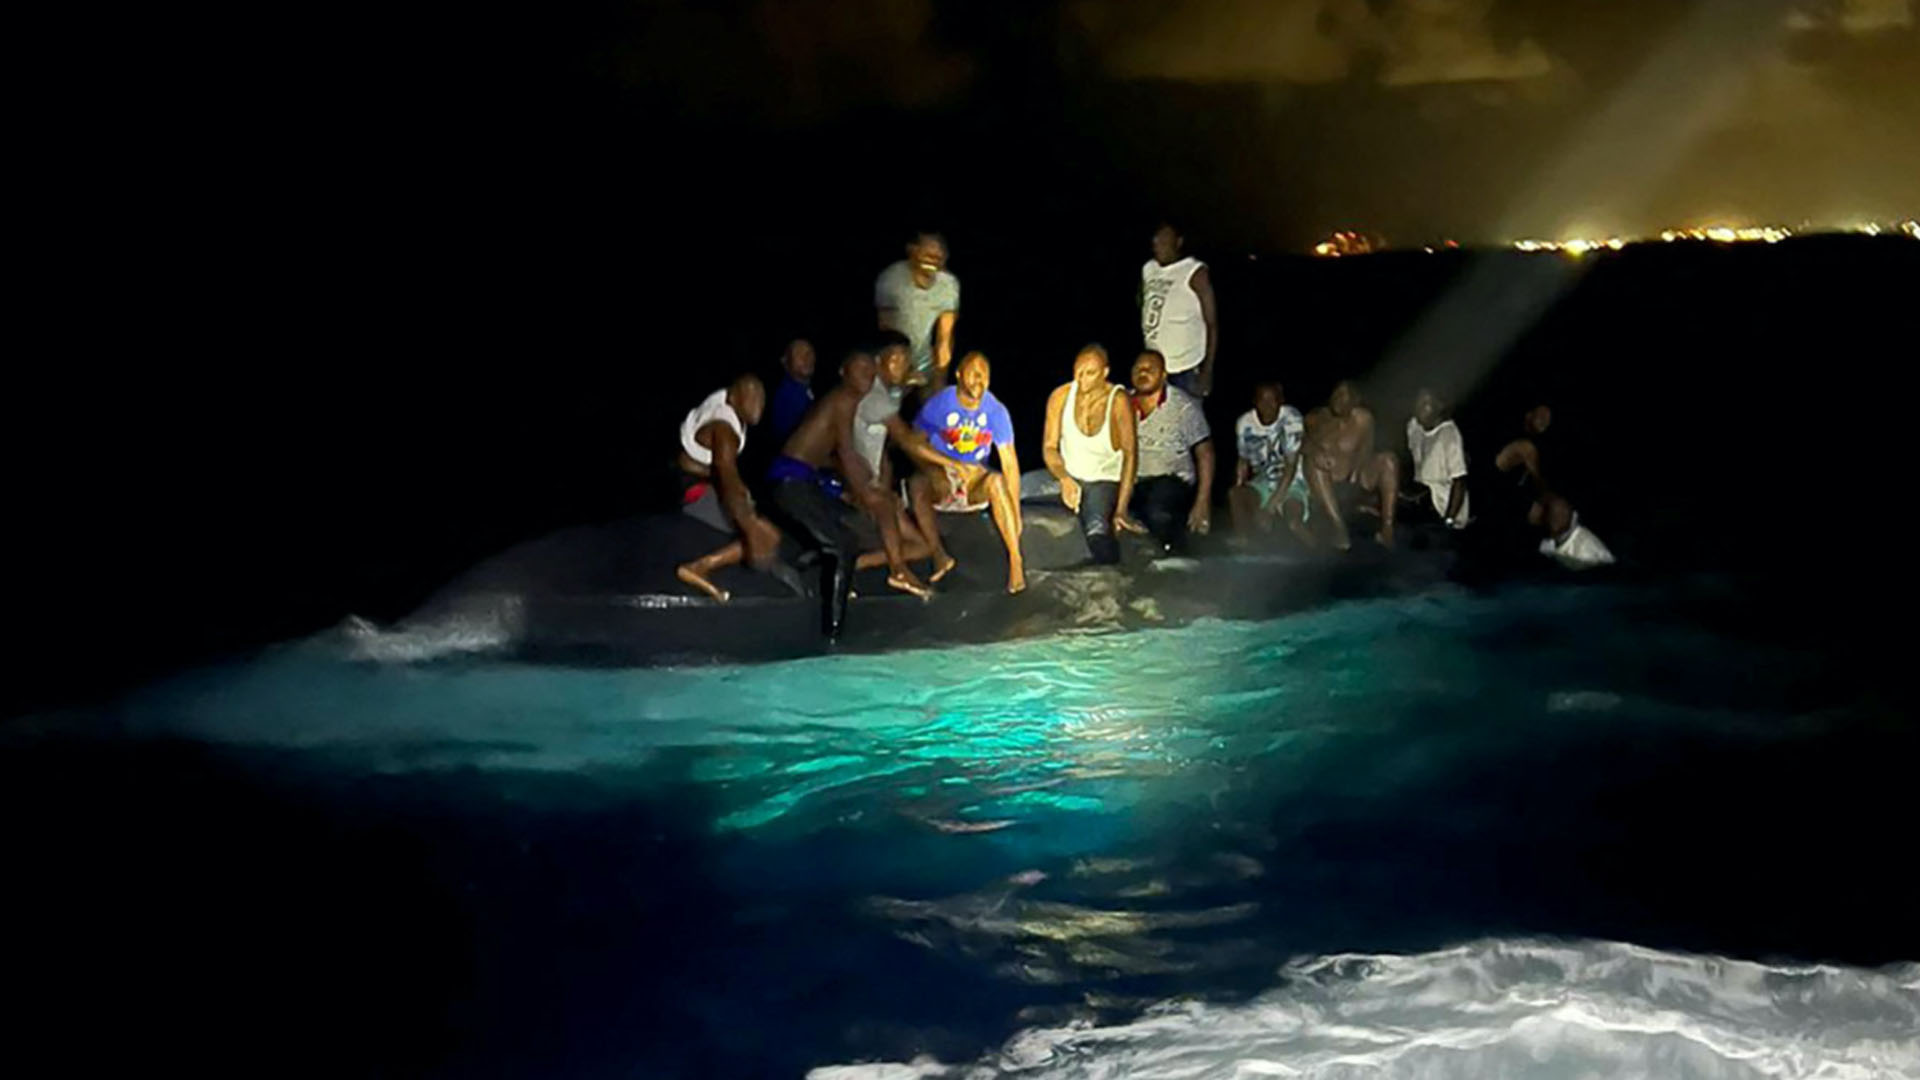 Survivors sitting on the hull of the capsized boat during nighttime.